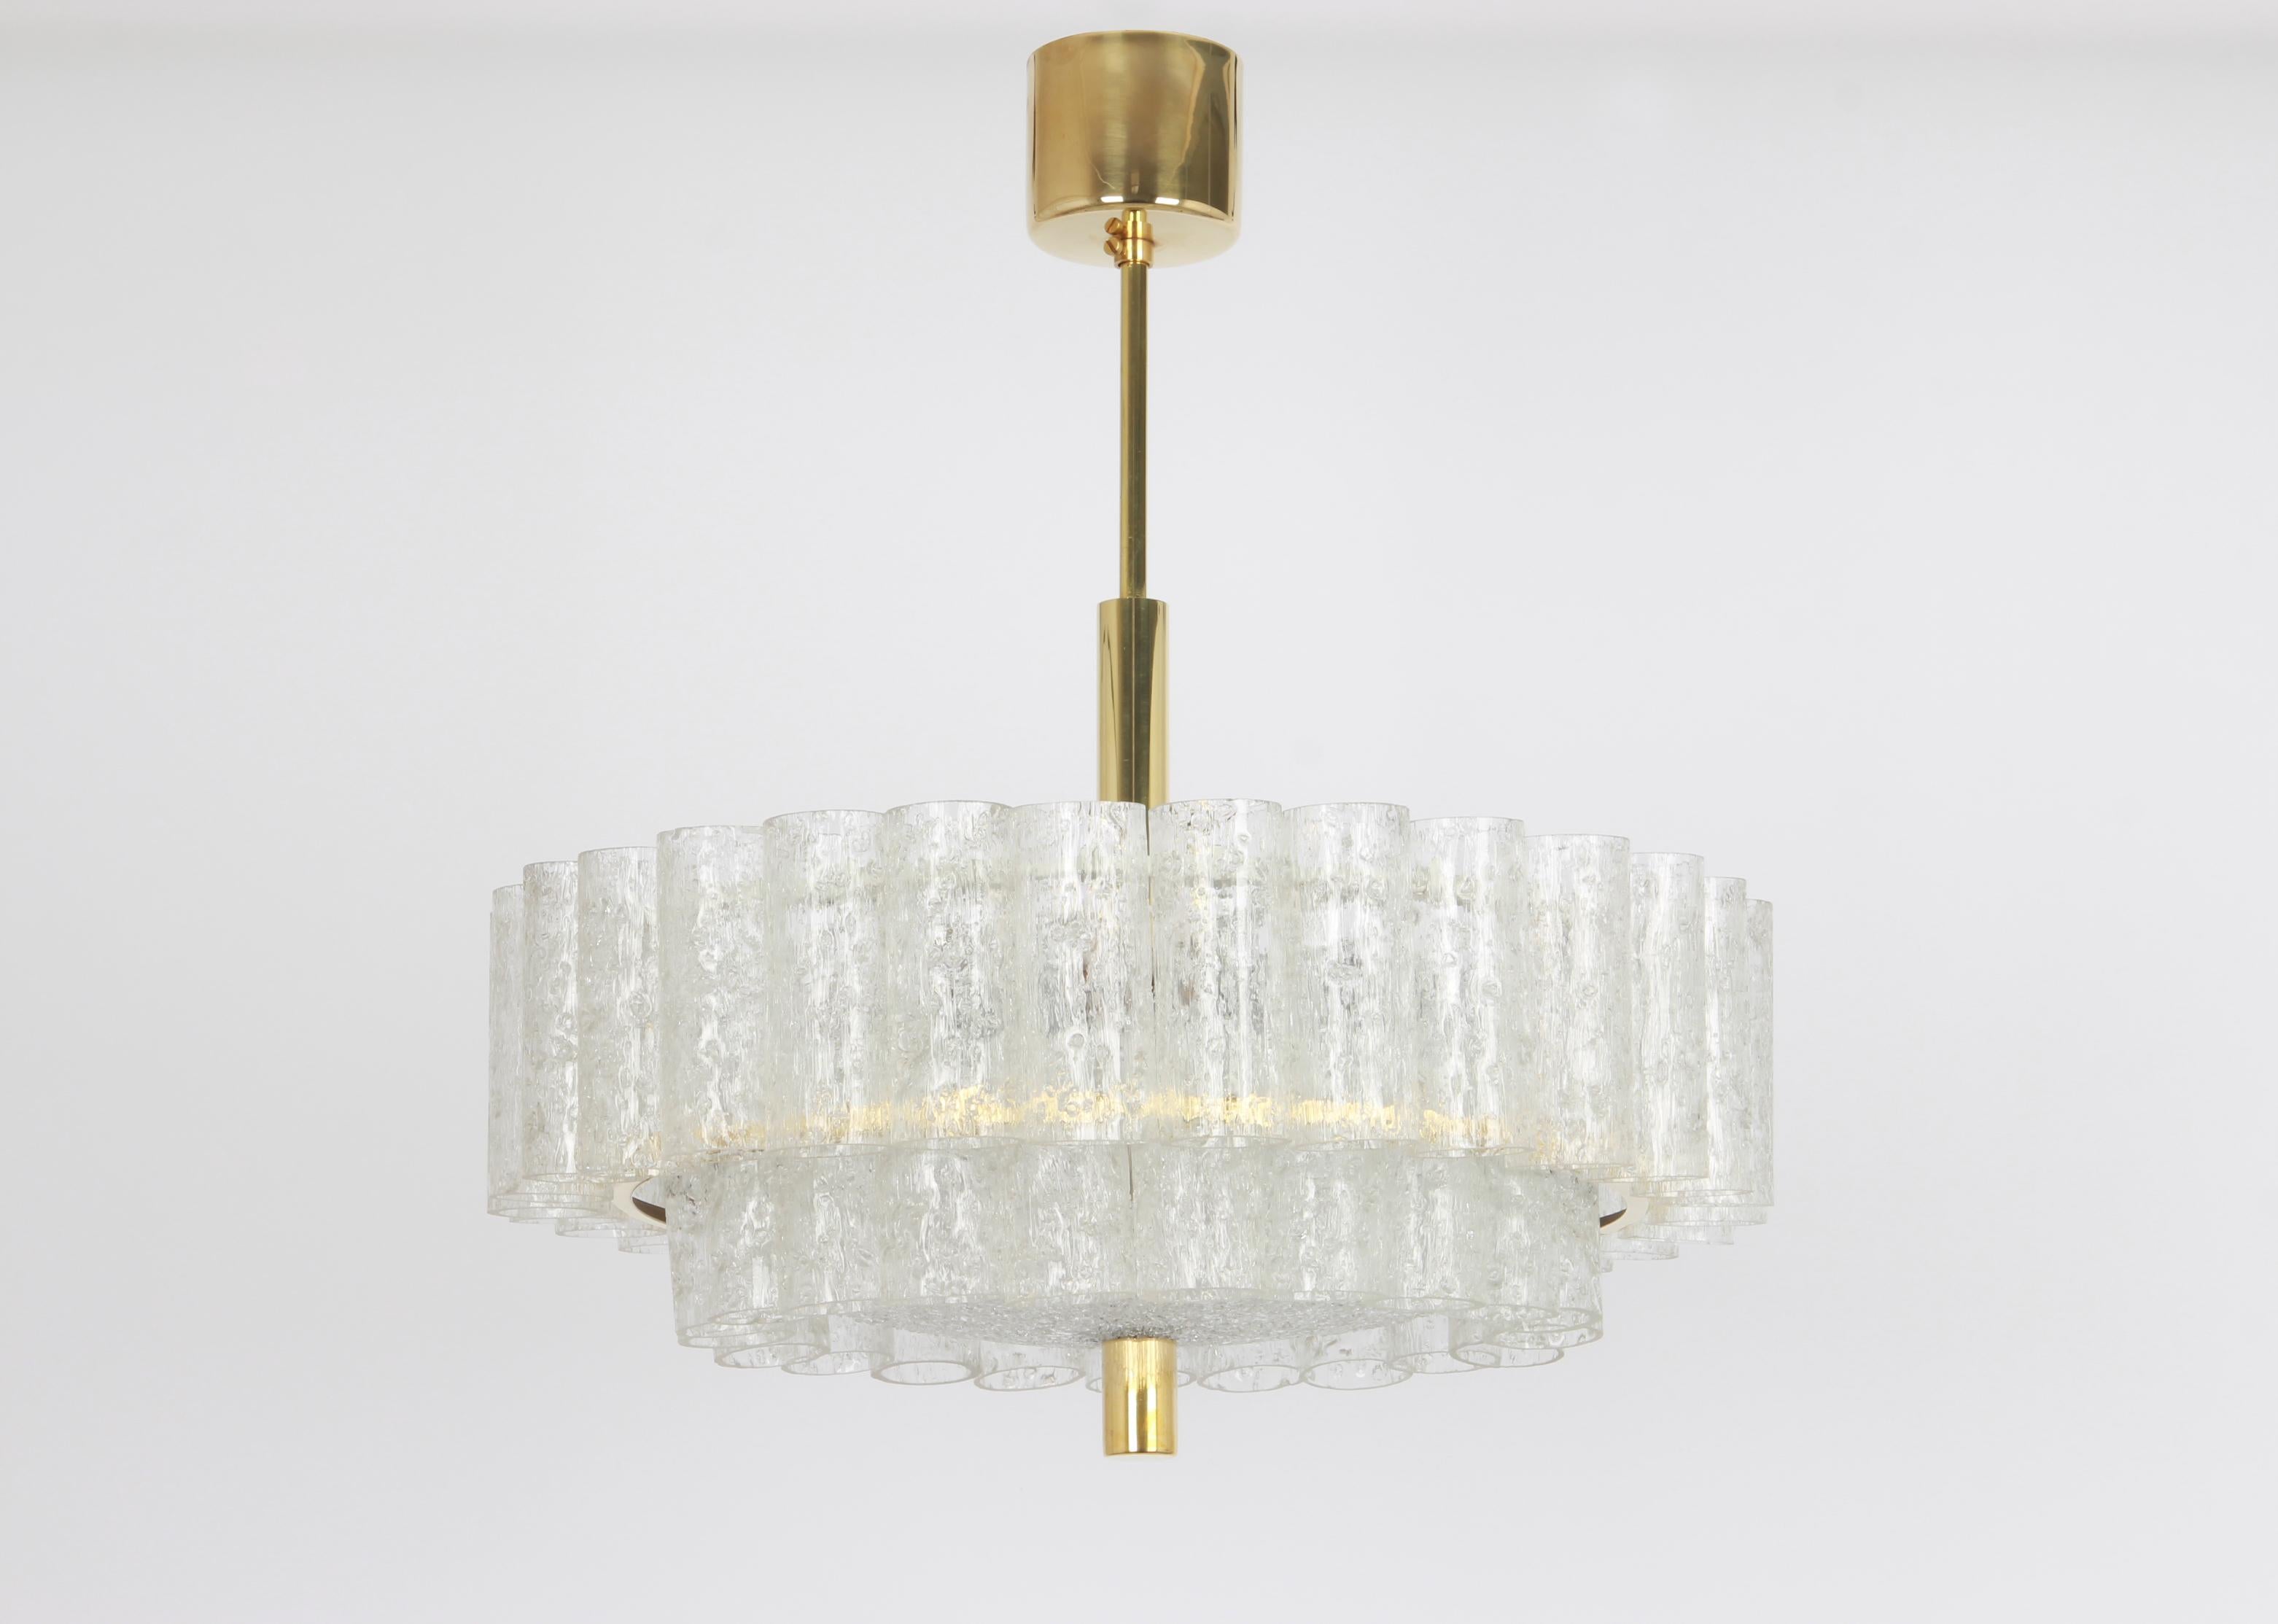 Fantastic two-tier midcentury chandelier by Doria, Germany, manufactured circa 1960-1969. Two rings of Murano glass cylinders suspended from a fixture.

Heavy quality and in very good condition. Cleaned, well-wired and ready to use. 

The